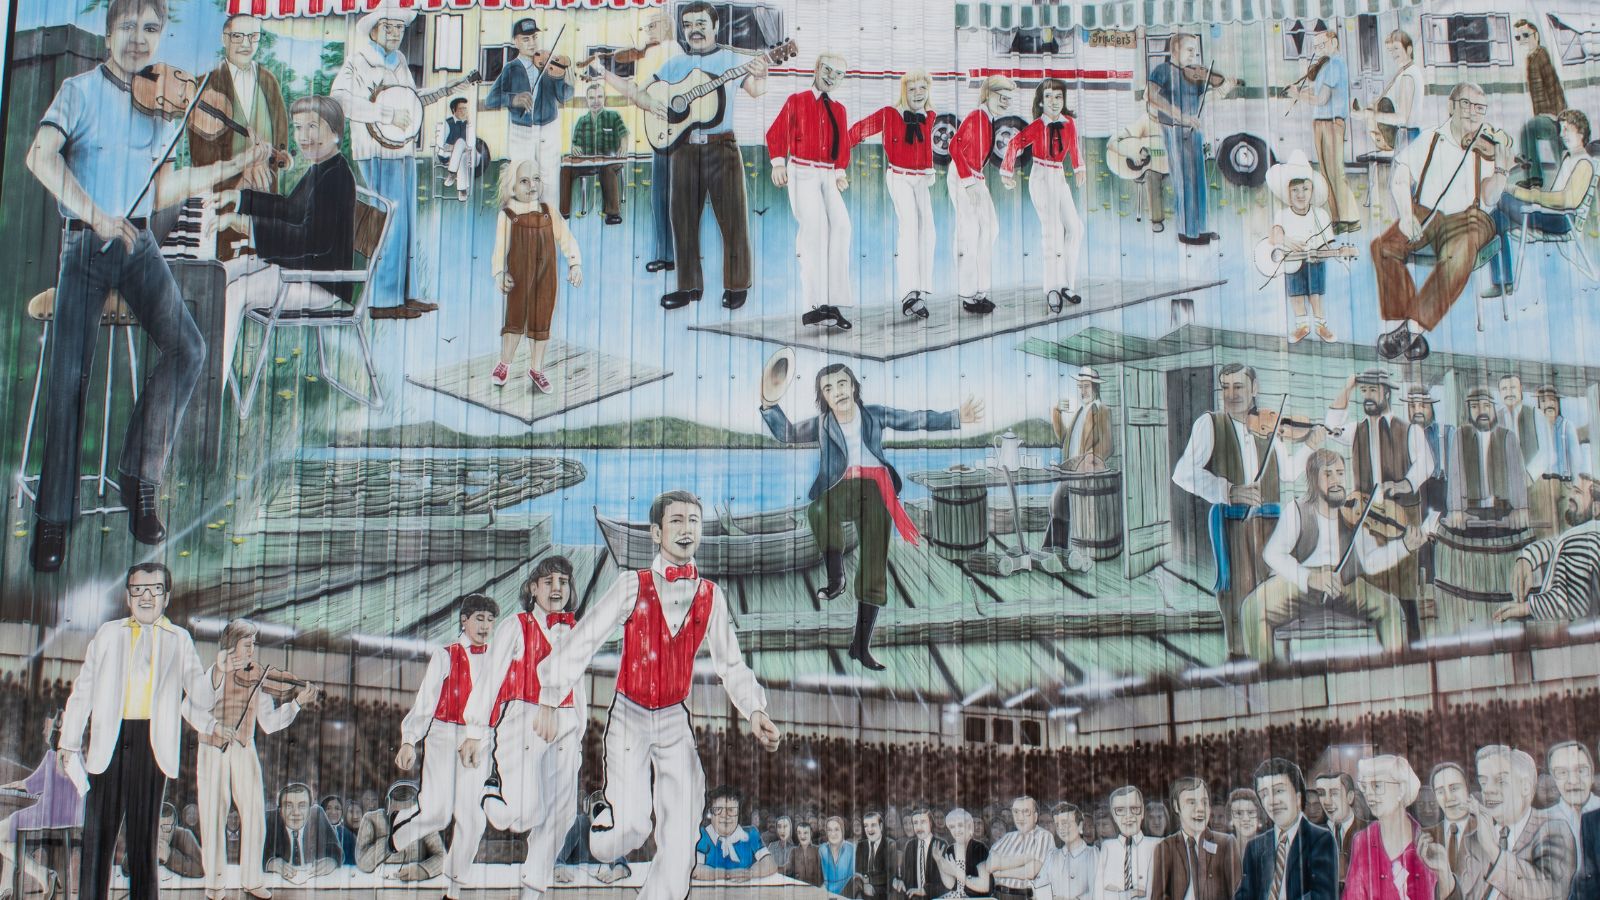 Photo of the Old Time Fiddling and Stepdancing mural.